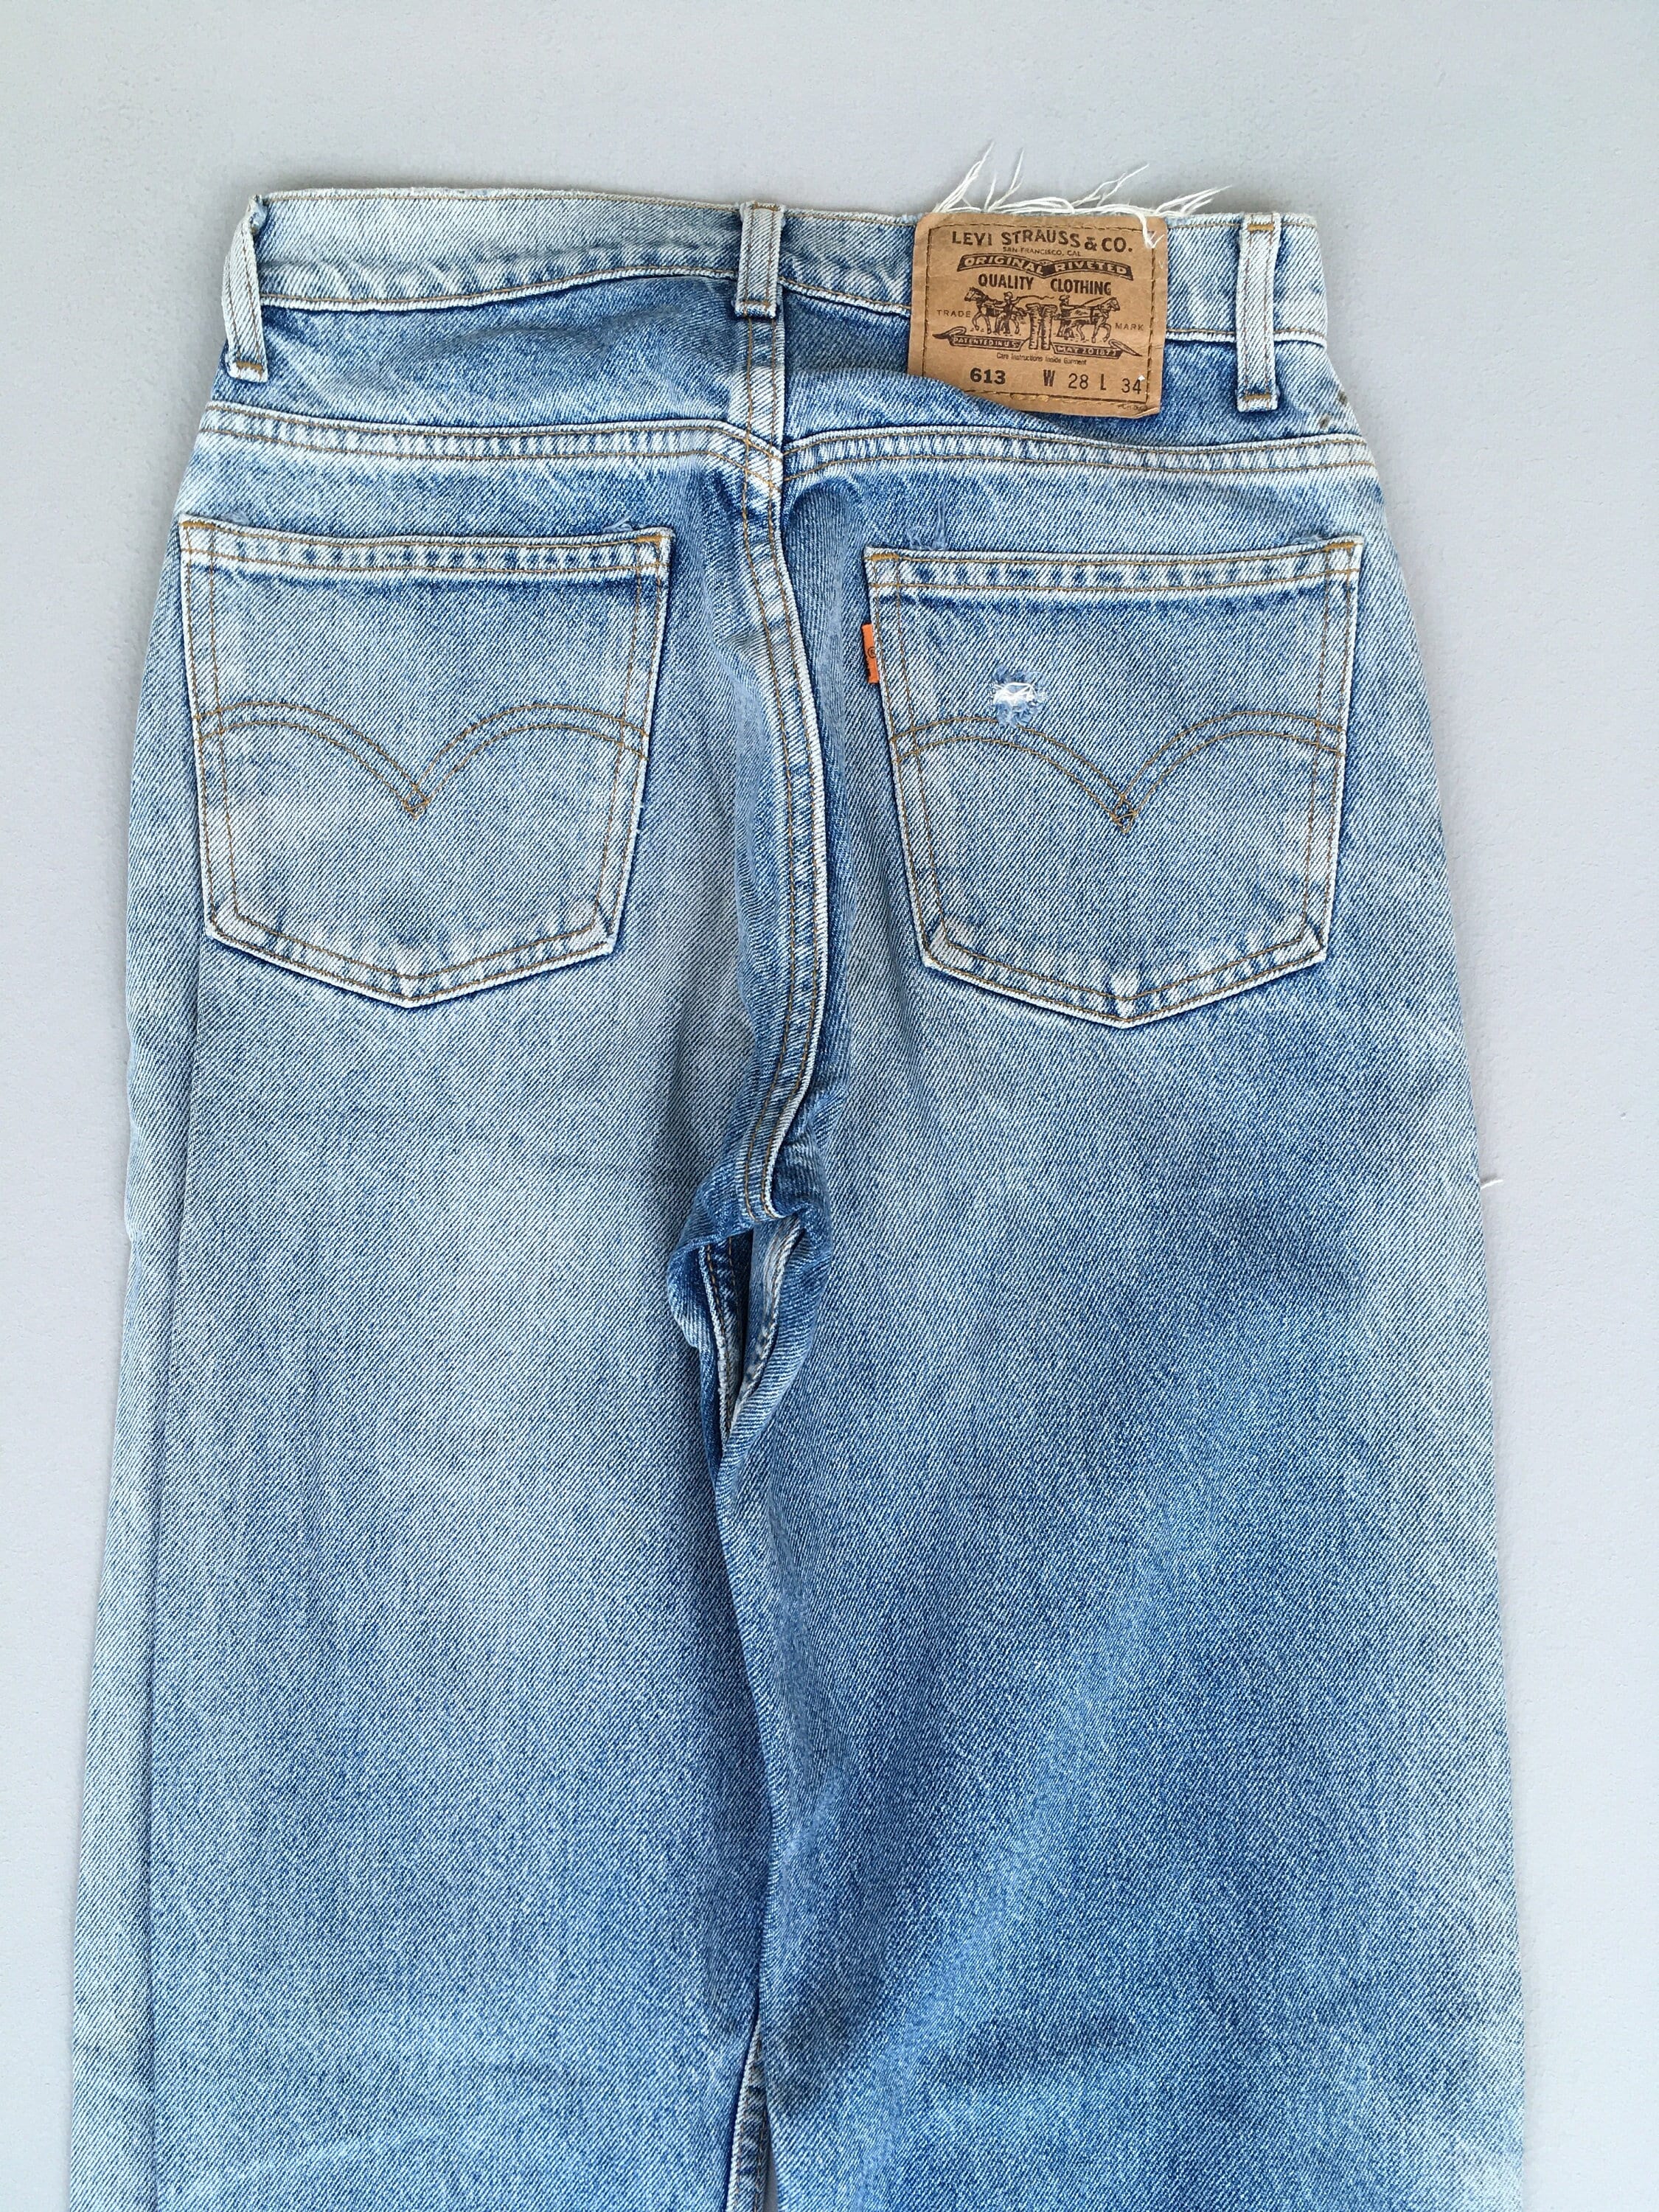 Size 26x32.5 Vintage Levis 613 Faded Blue Jeans Light Washed Jeans Levis  1990s Levis Relaxed Fit Denim Distressed Jeans Levis Mom Jeans W26